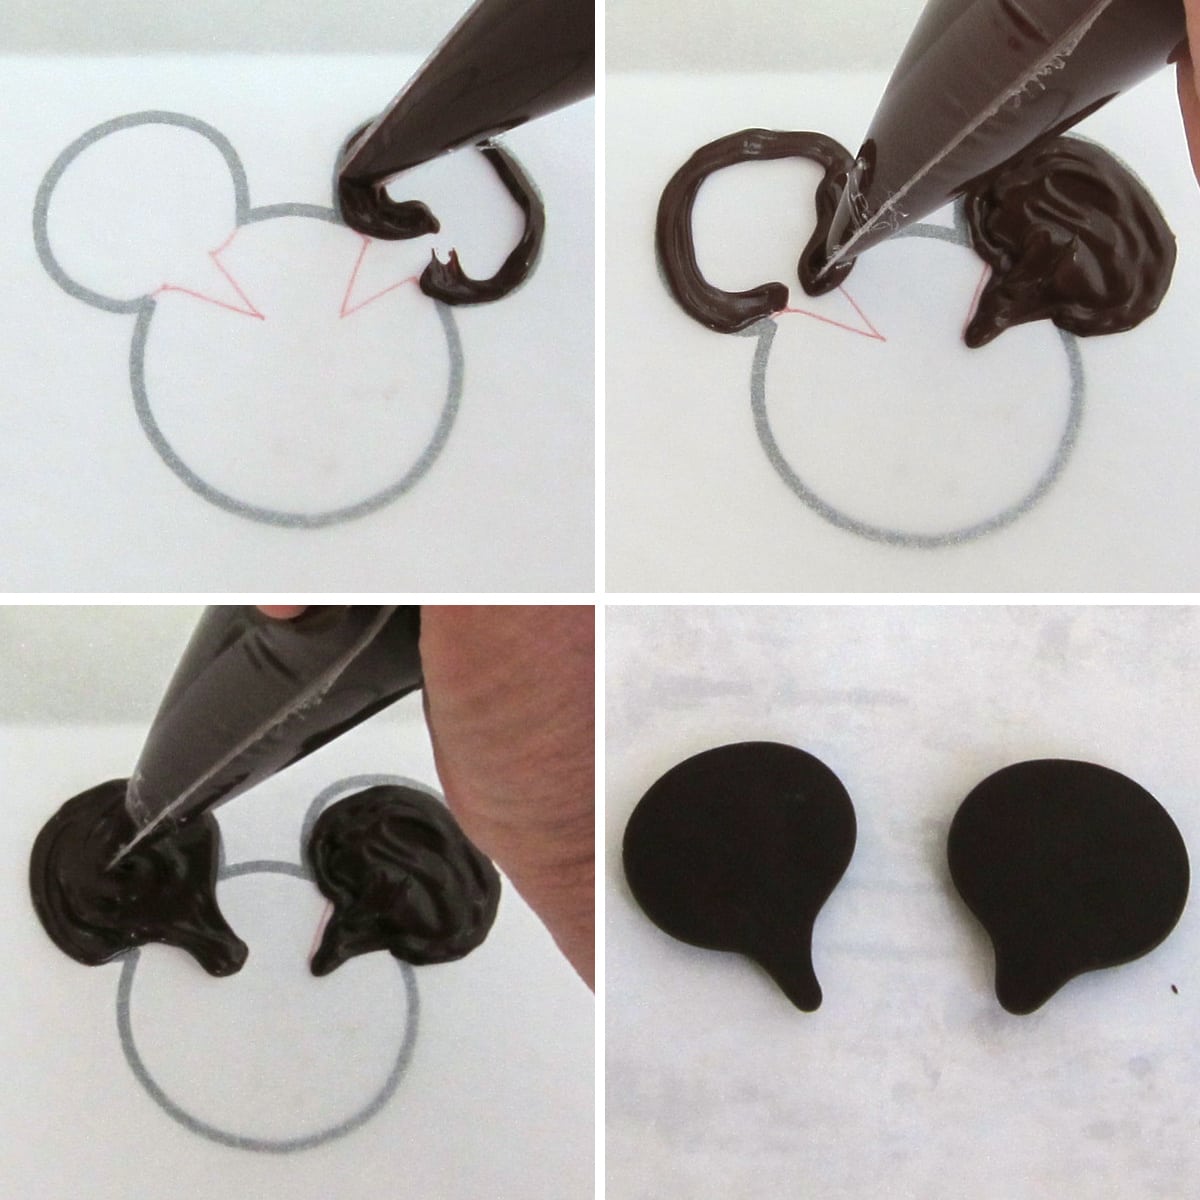 piping chocolate Mickey Mouse ears over a template.